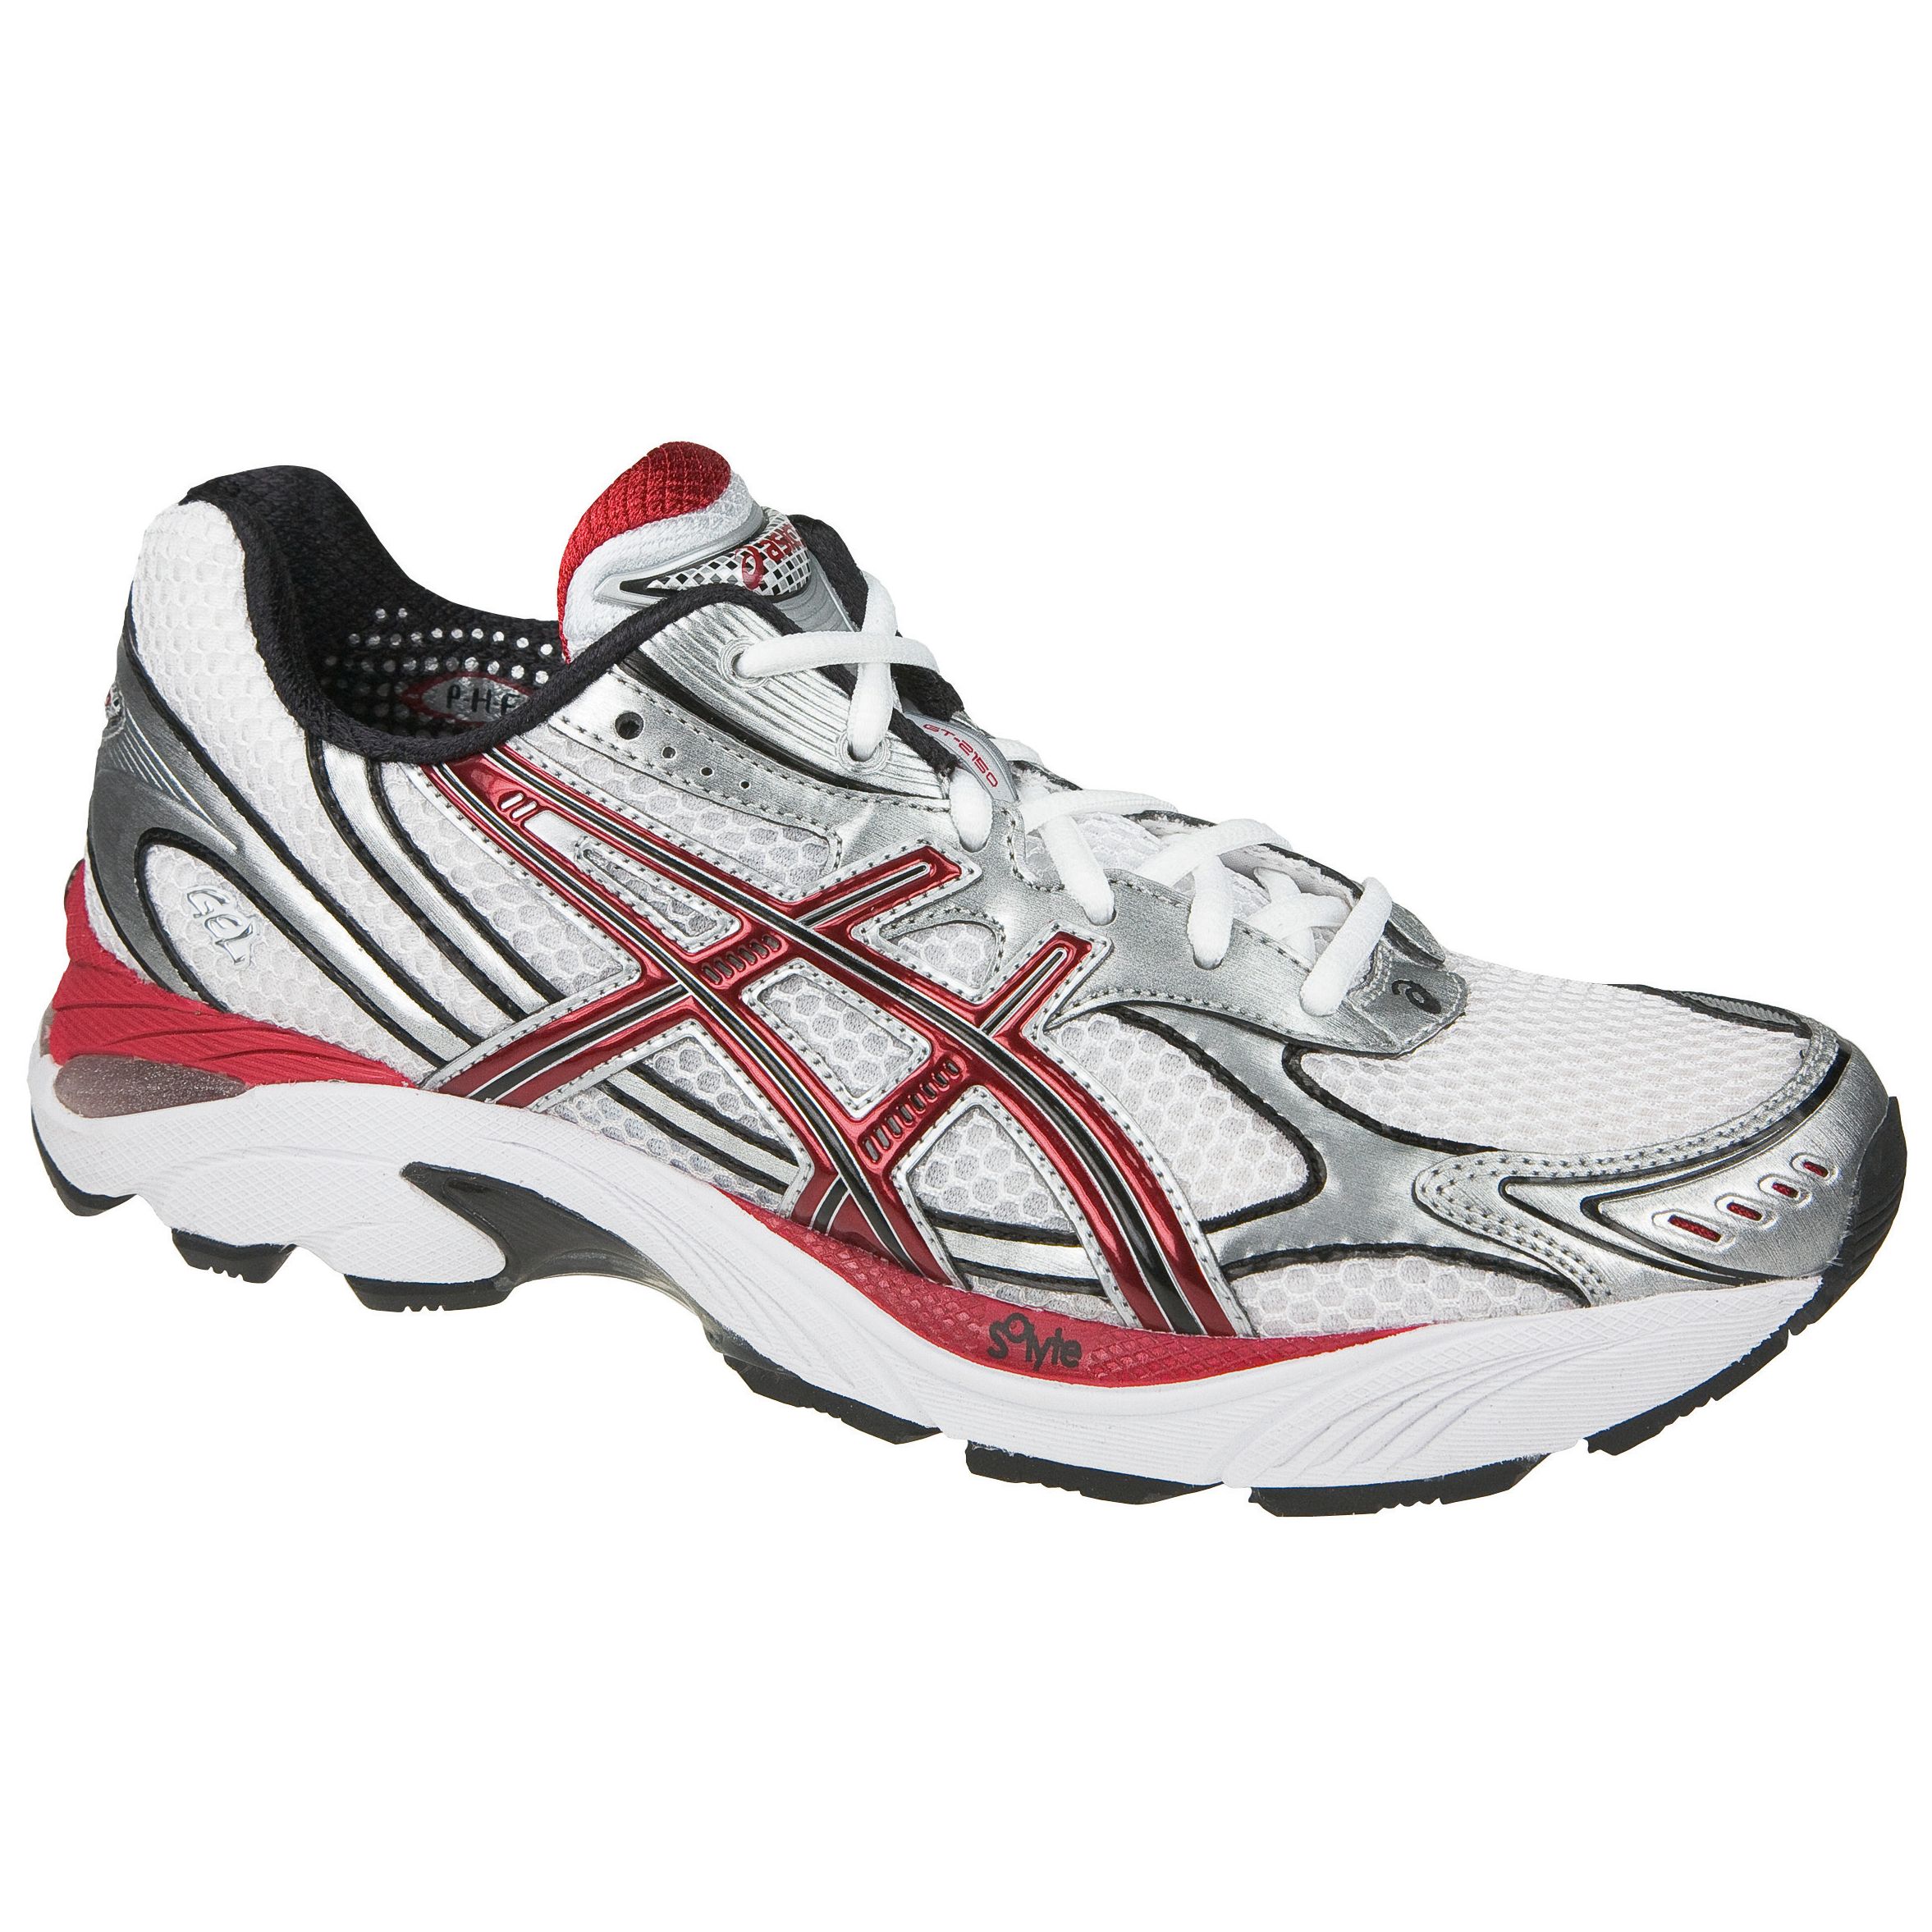 Asics GT2150 Running Shoes, White/red